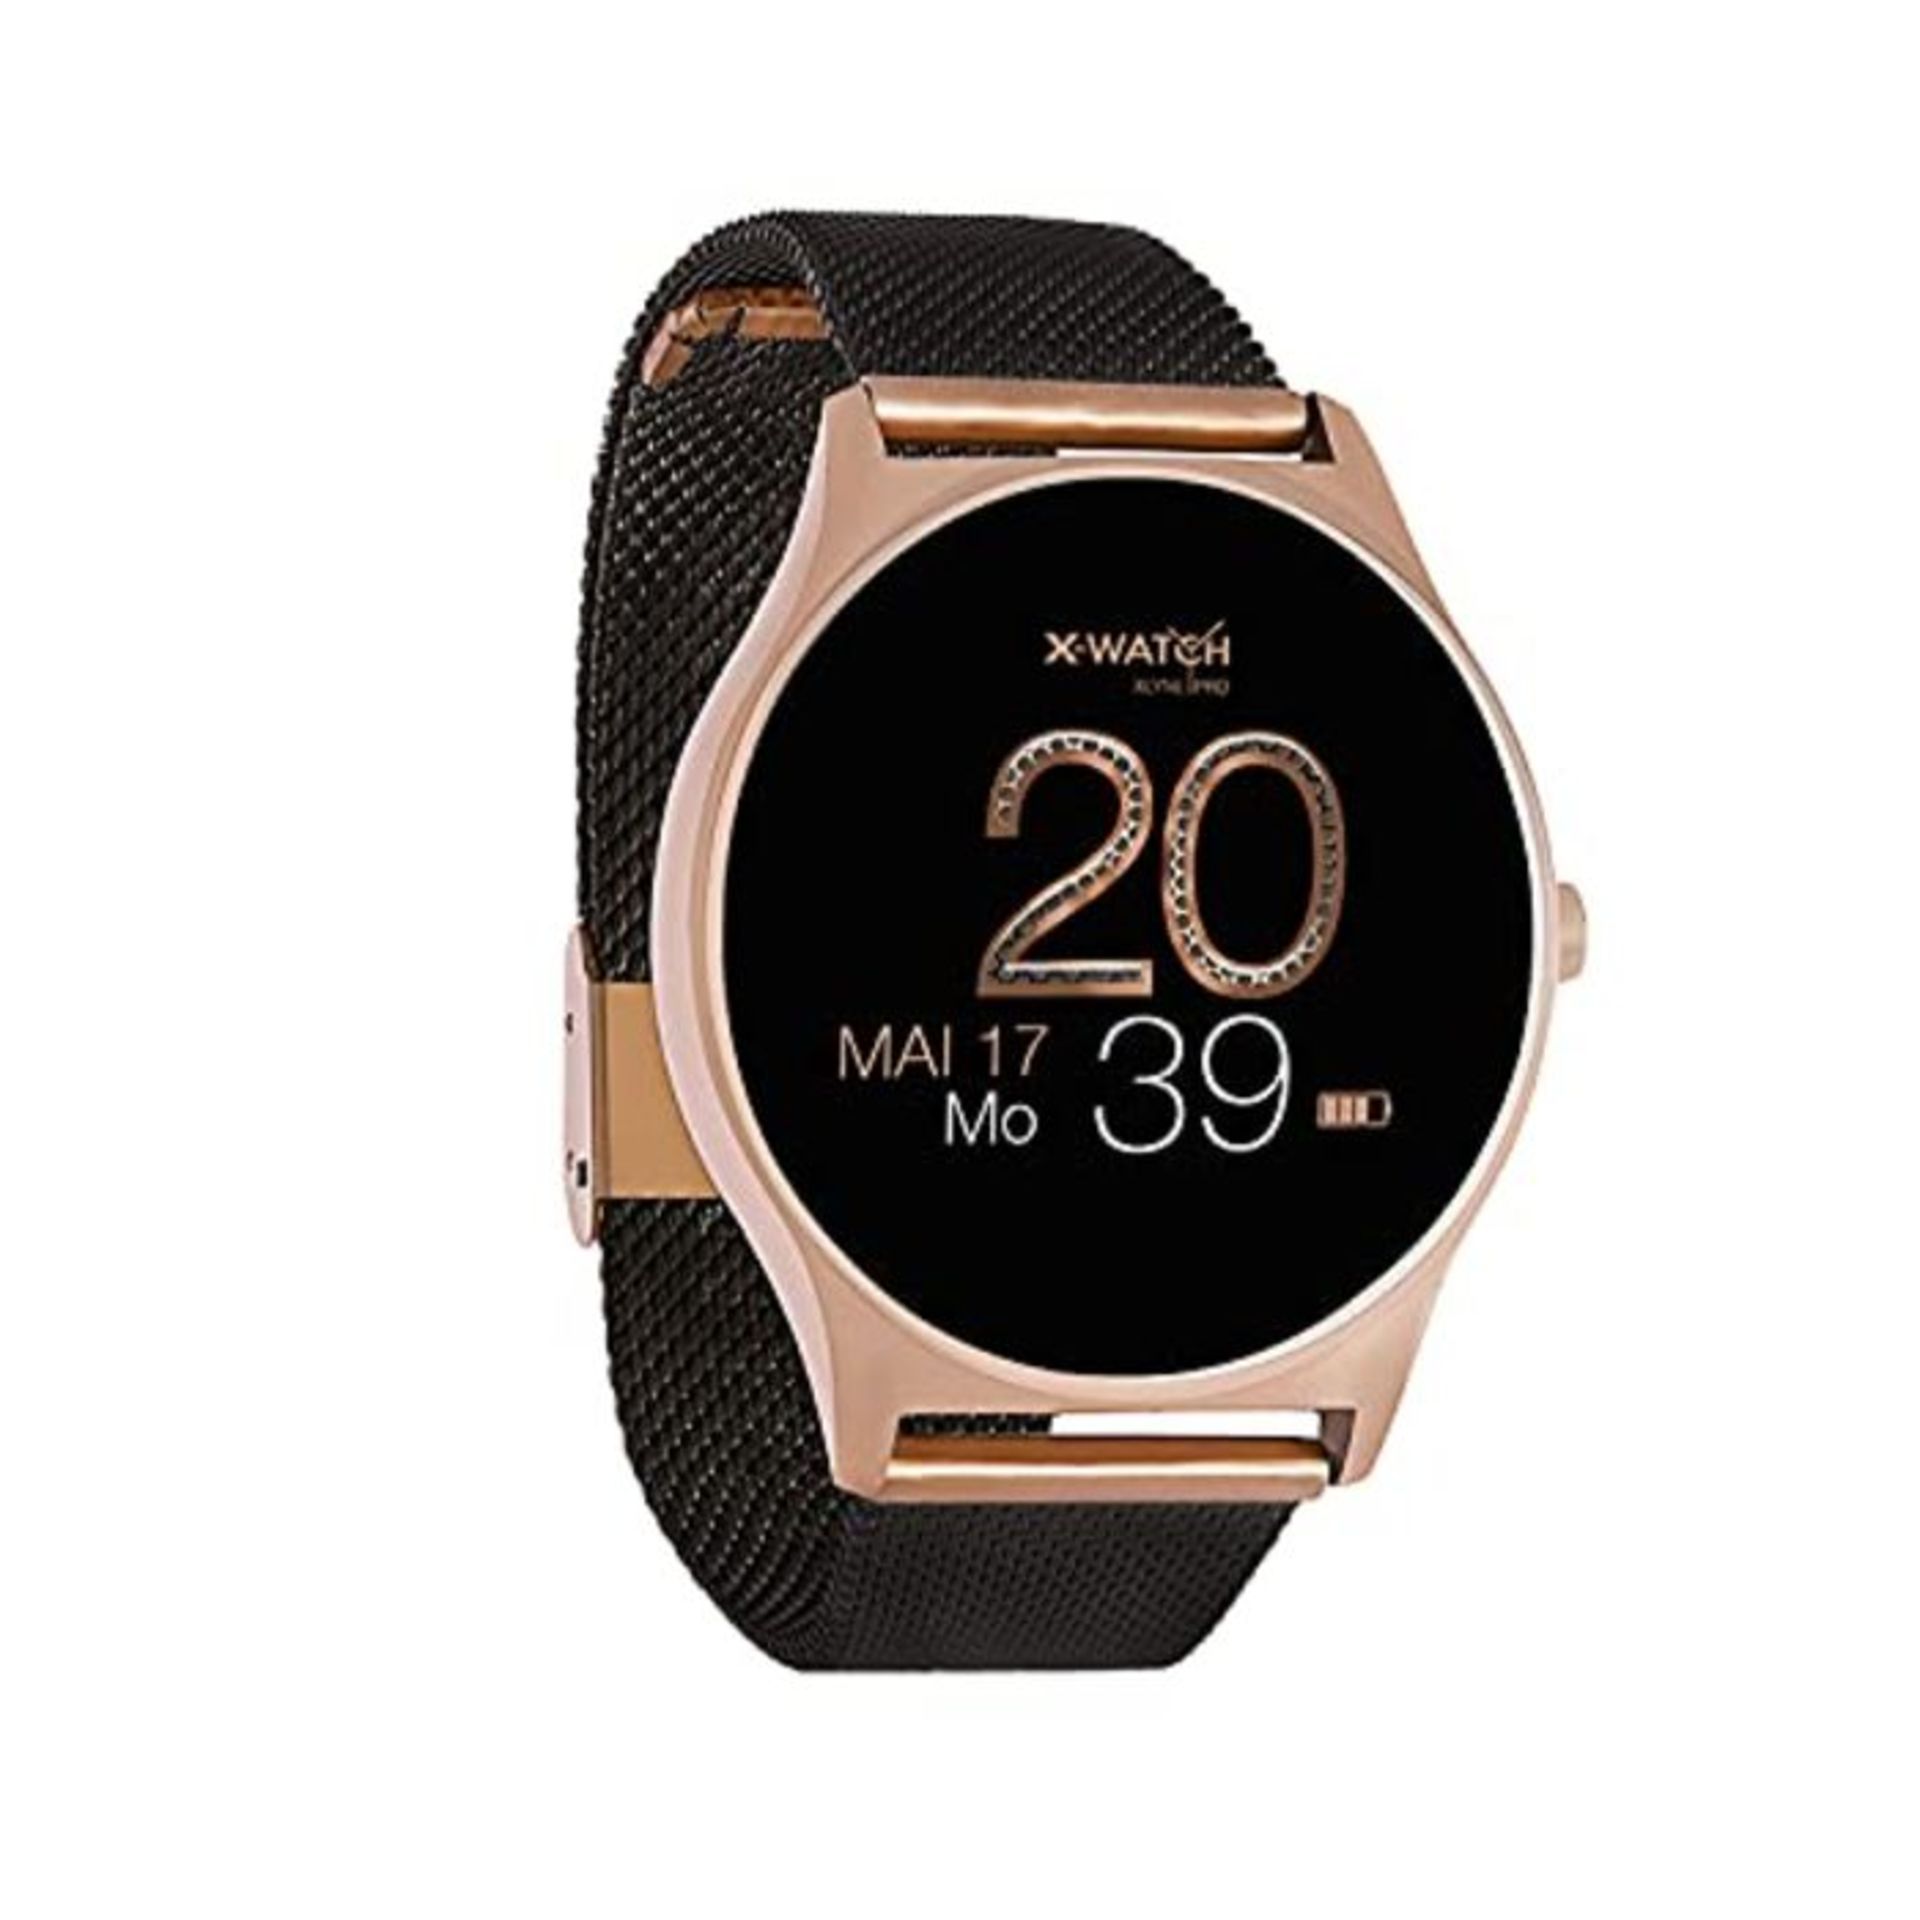 RRP £77.00 X-WATCH JOLI 2.0 XW PRO Smart watch for women iOS & Android - fashion watch/Full Touch